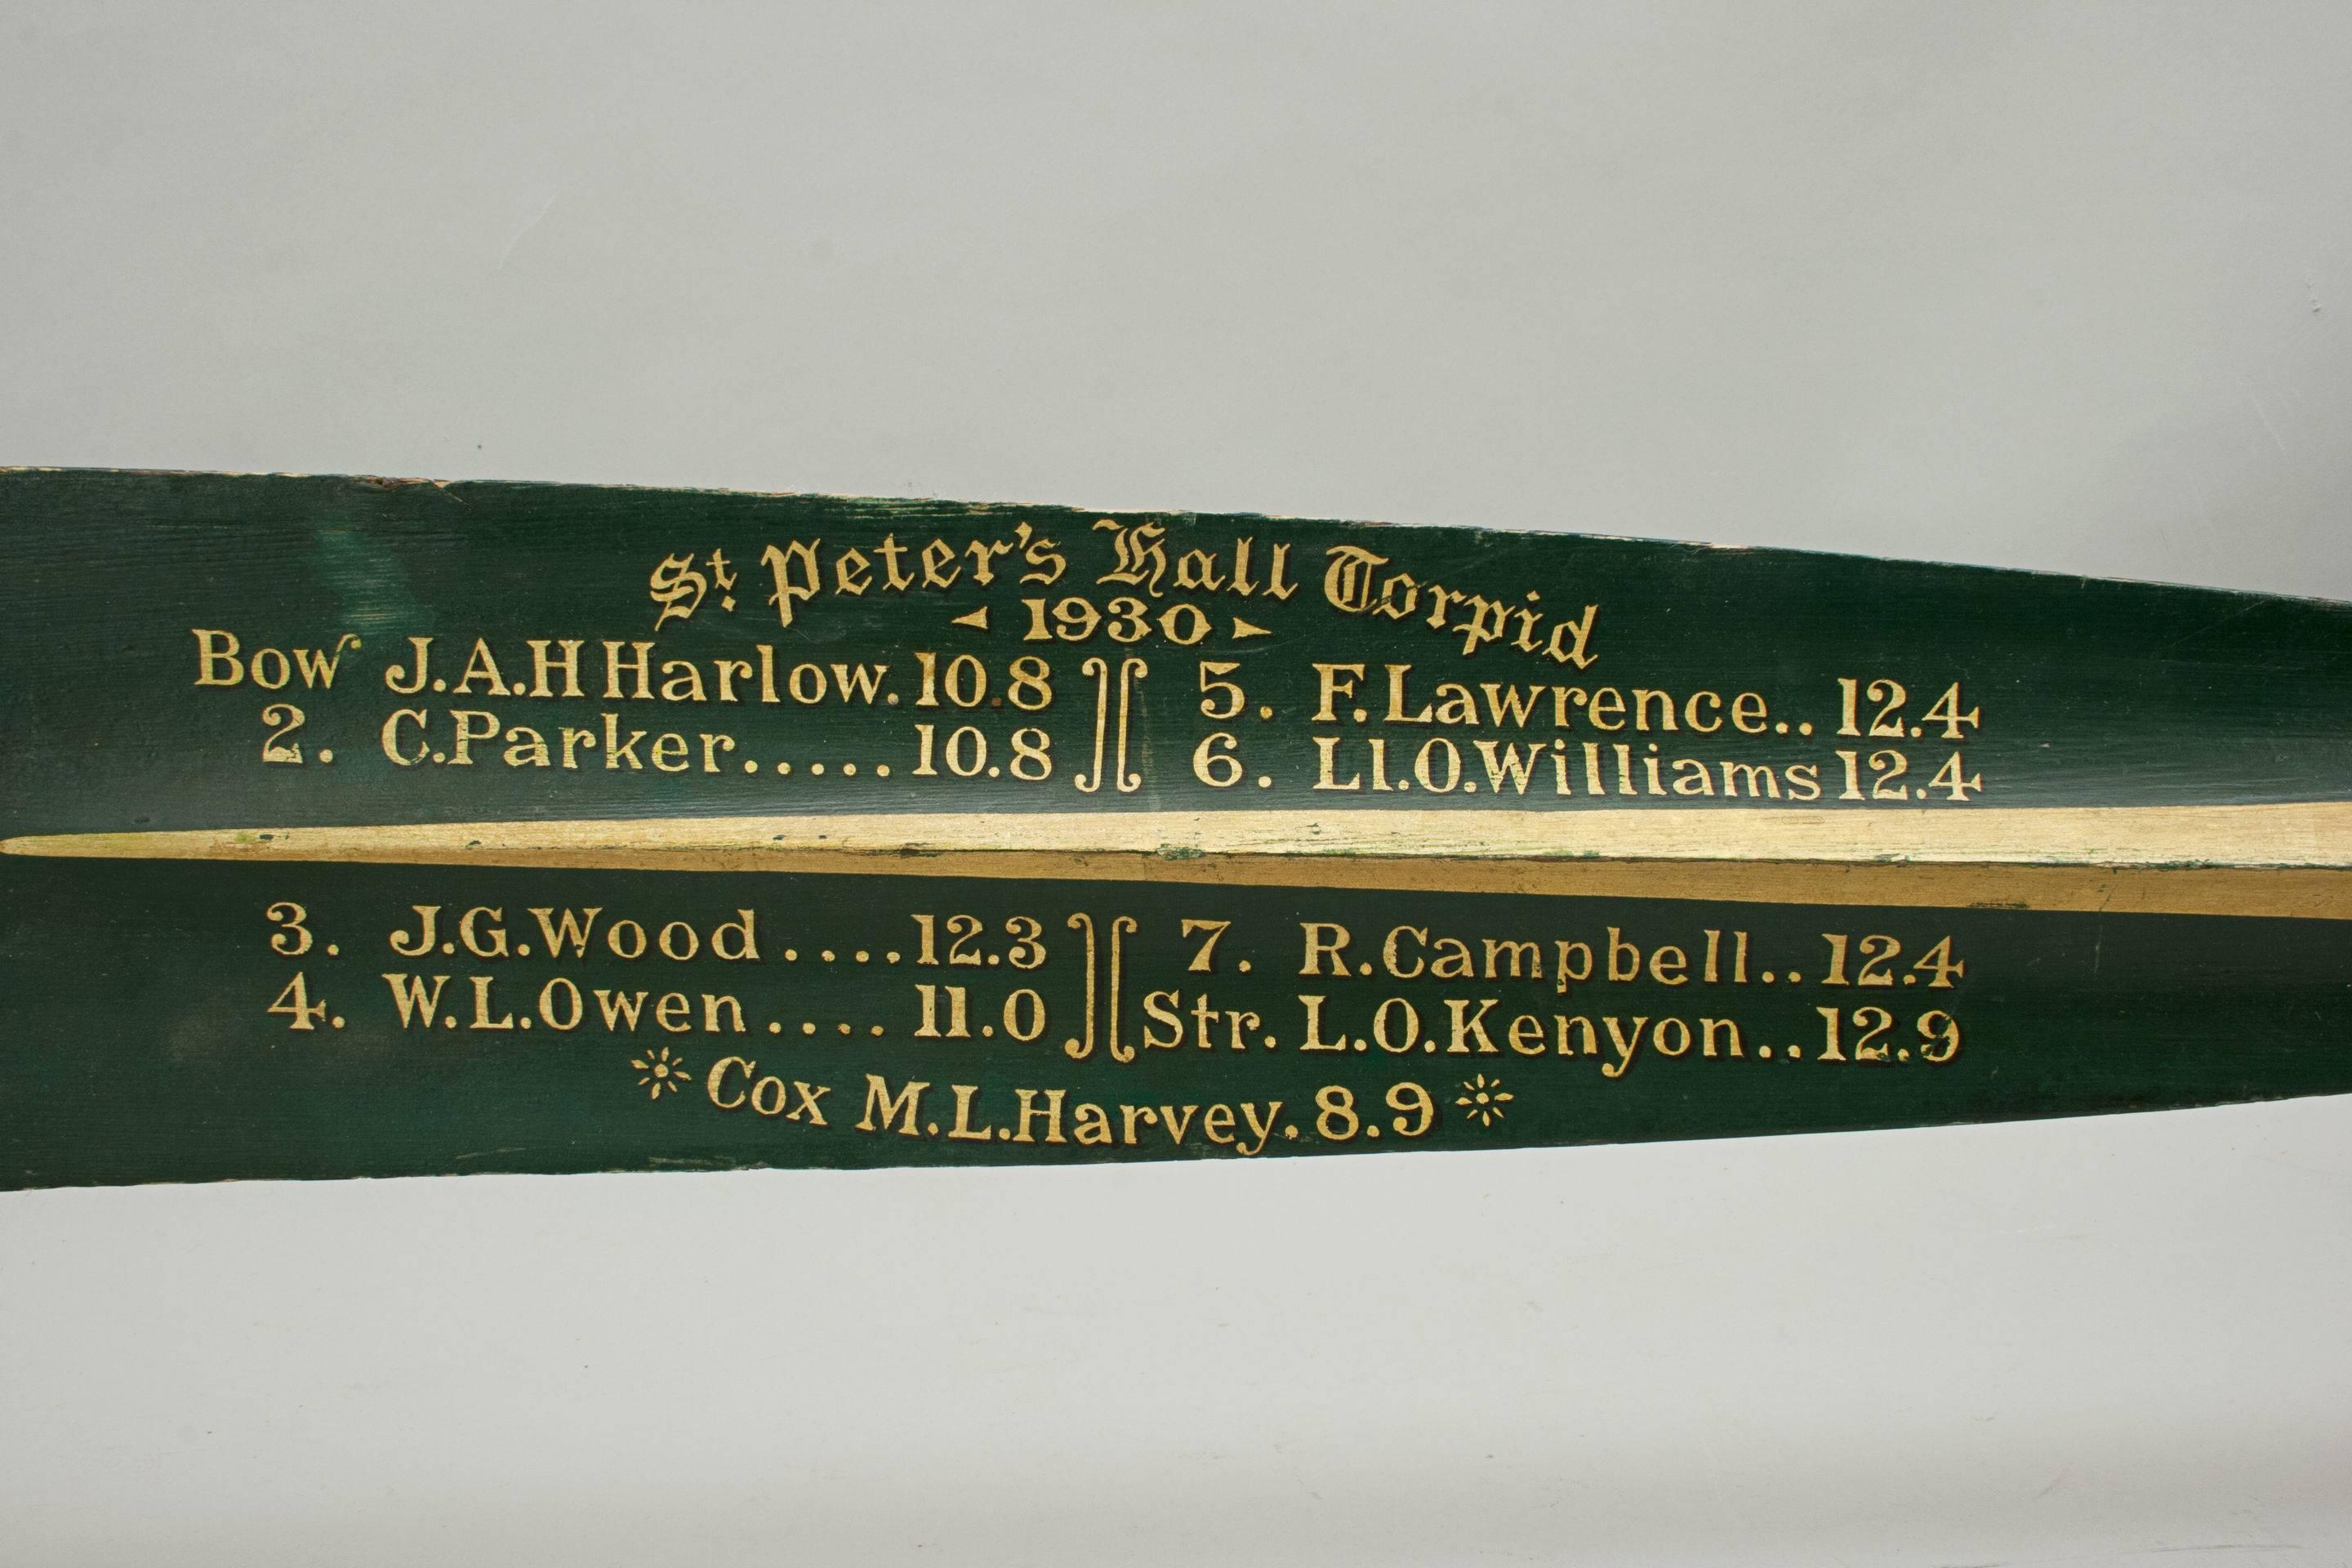 Oxford University presentation oar, trophy blade, 1930. 
The oar is an original traditional St. Peter's Hall (Oxford University) presentation rowing oar with gilt calligraphy. The writing on the trophy blade is in good condition. The oar is